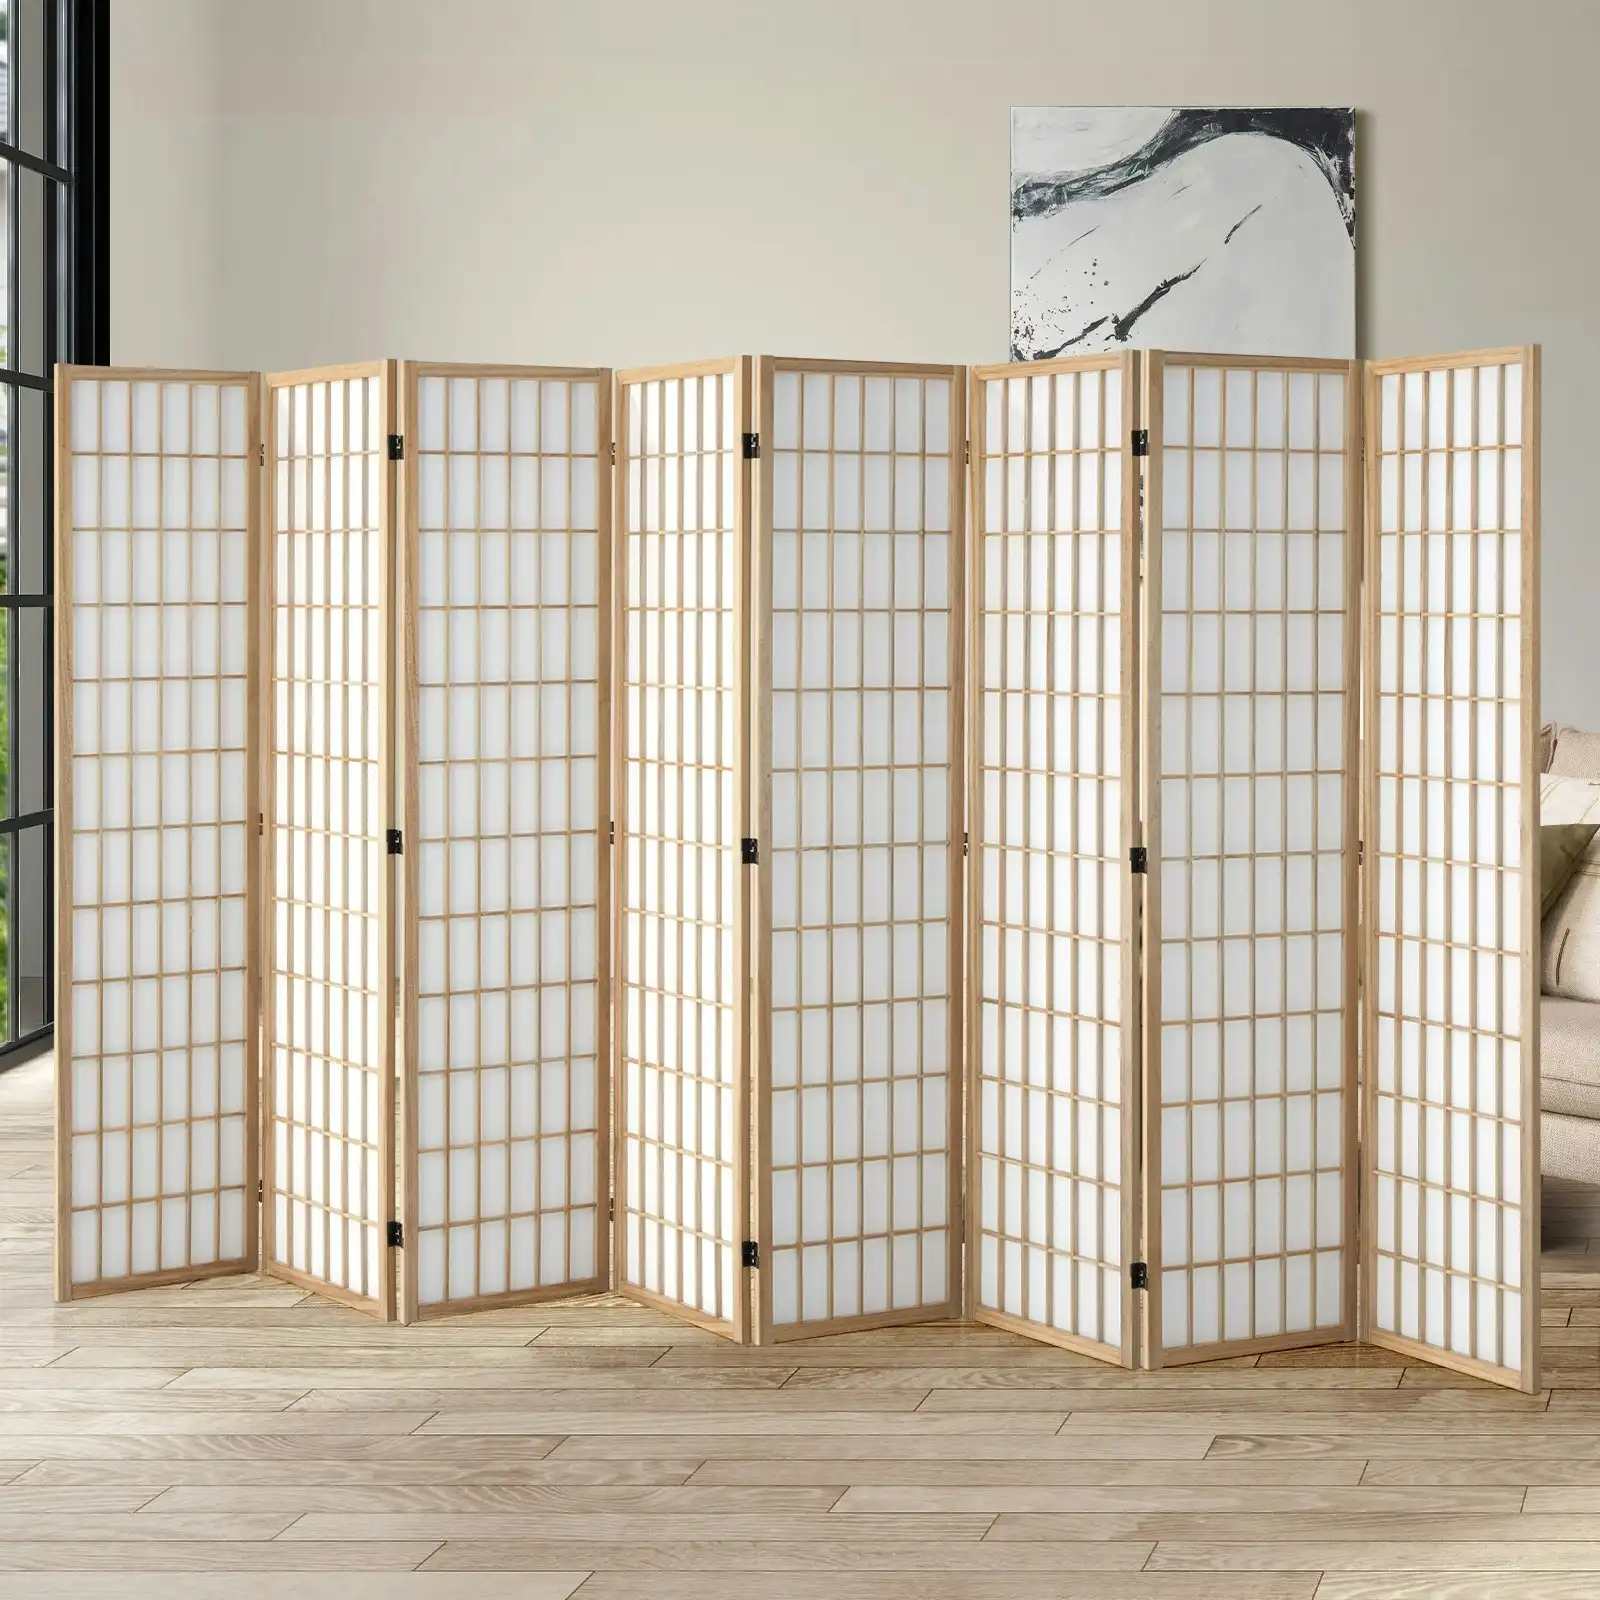 Oikiture 8 Panel Room Divider Privacy Screen Partition Timber Farbic Natural